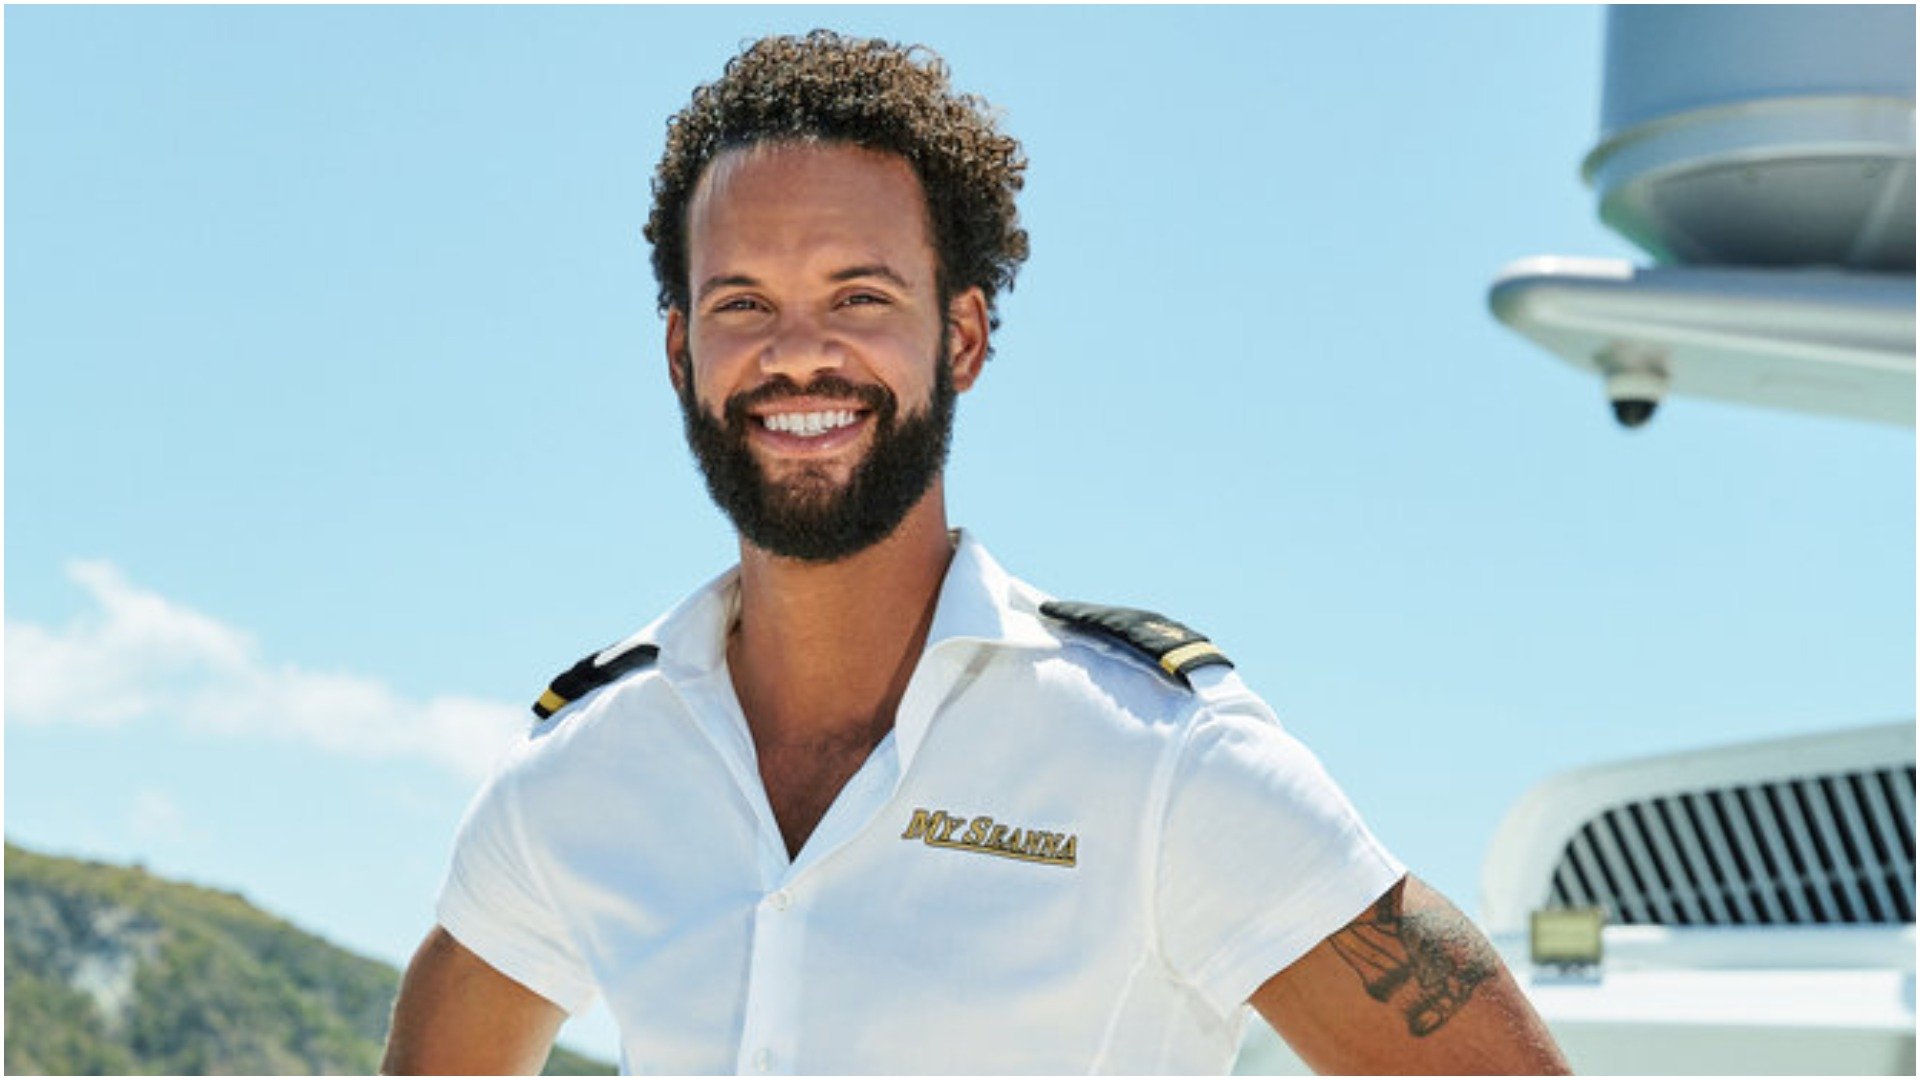 Wes O'Dell from Below Deck cast photo